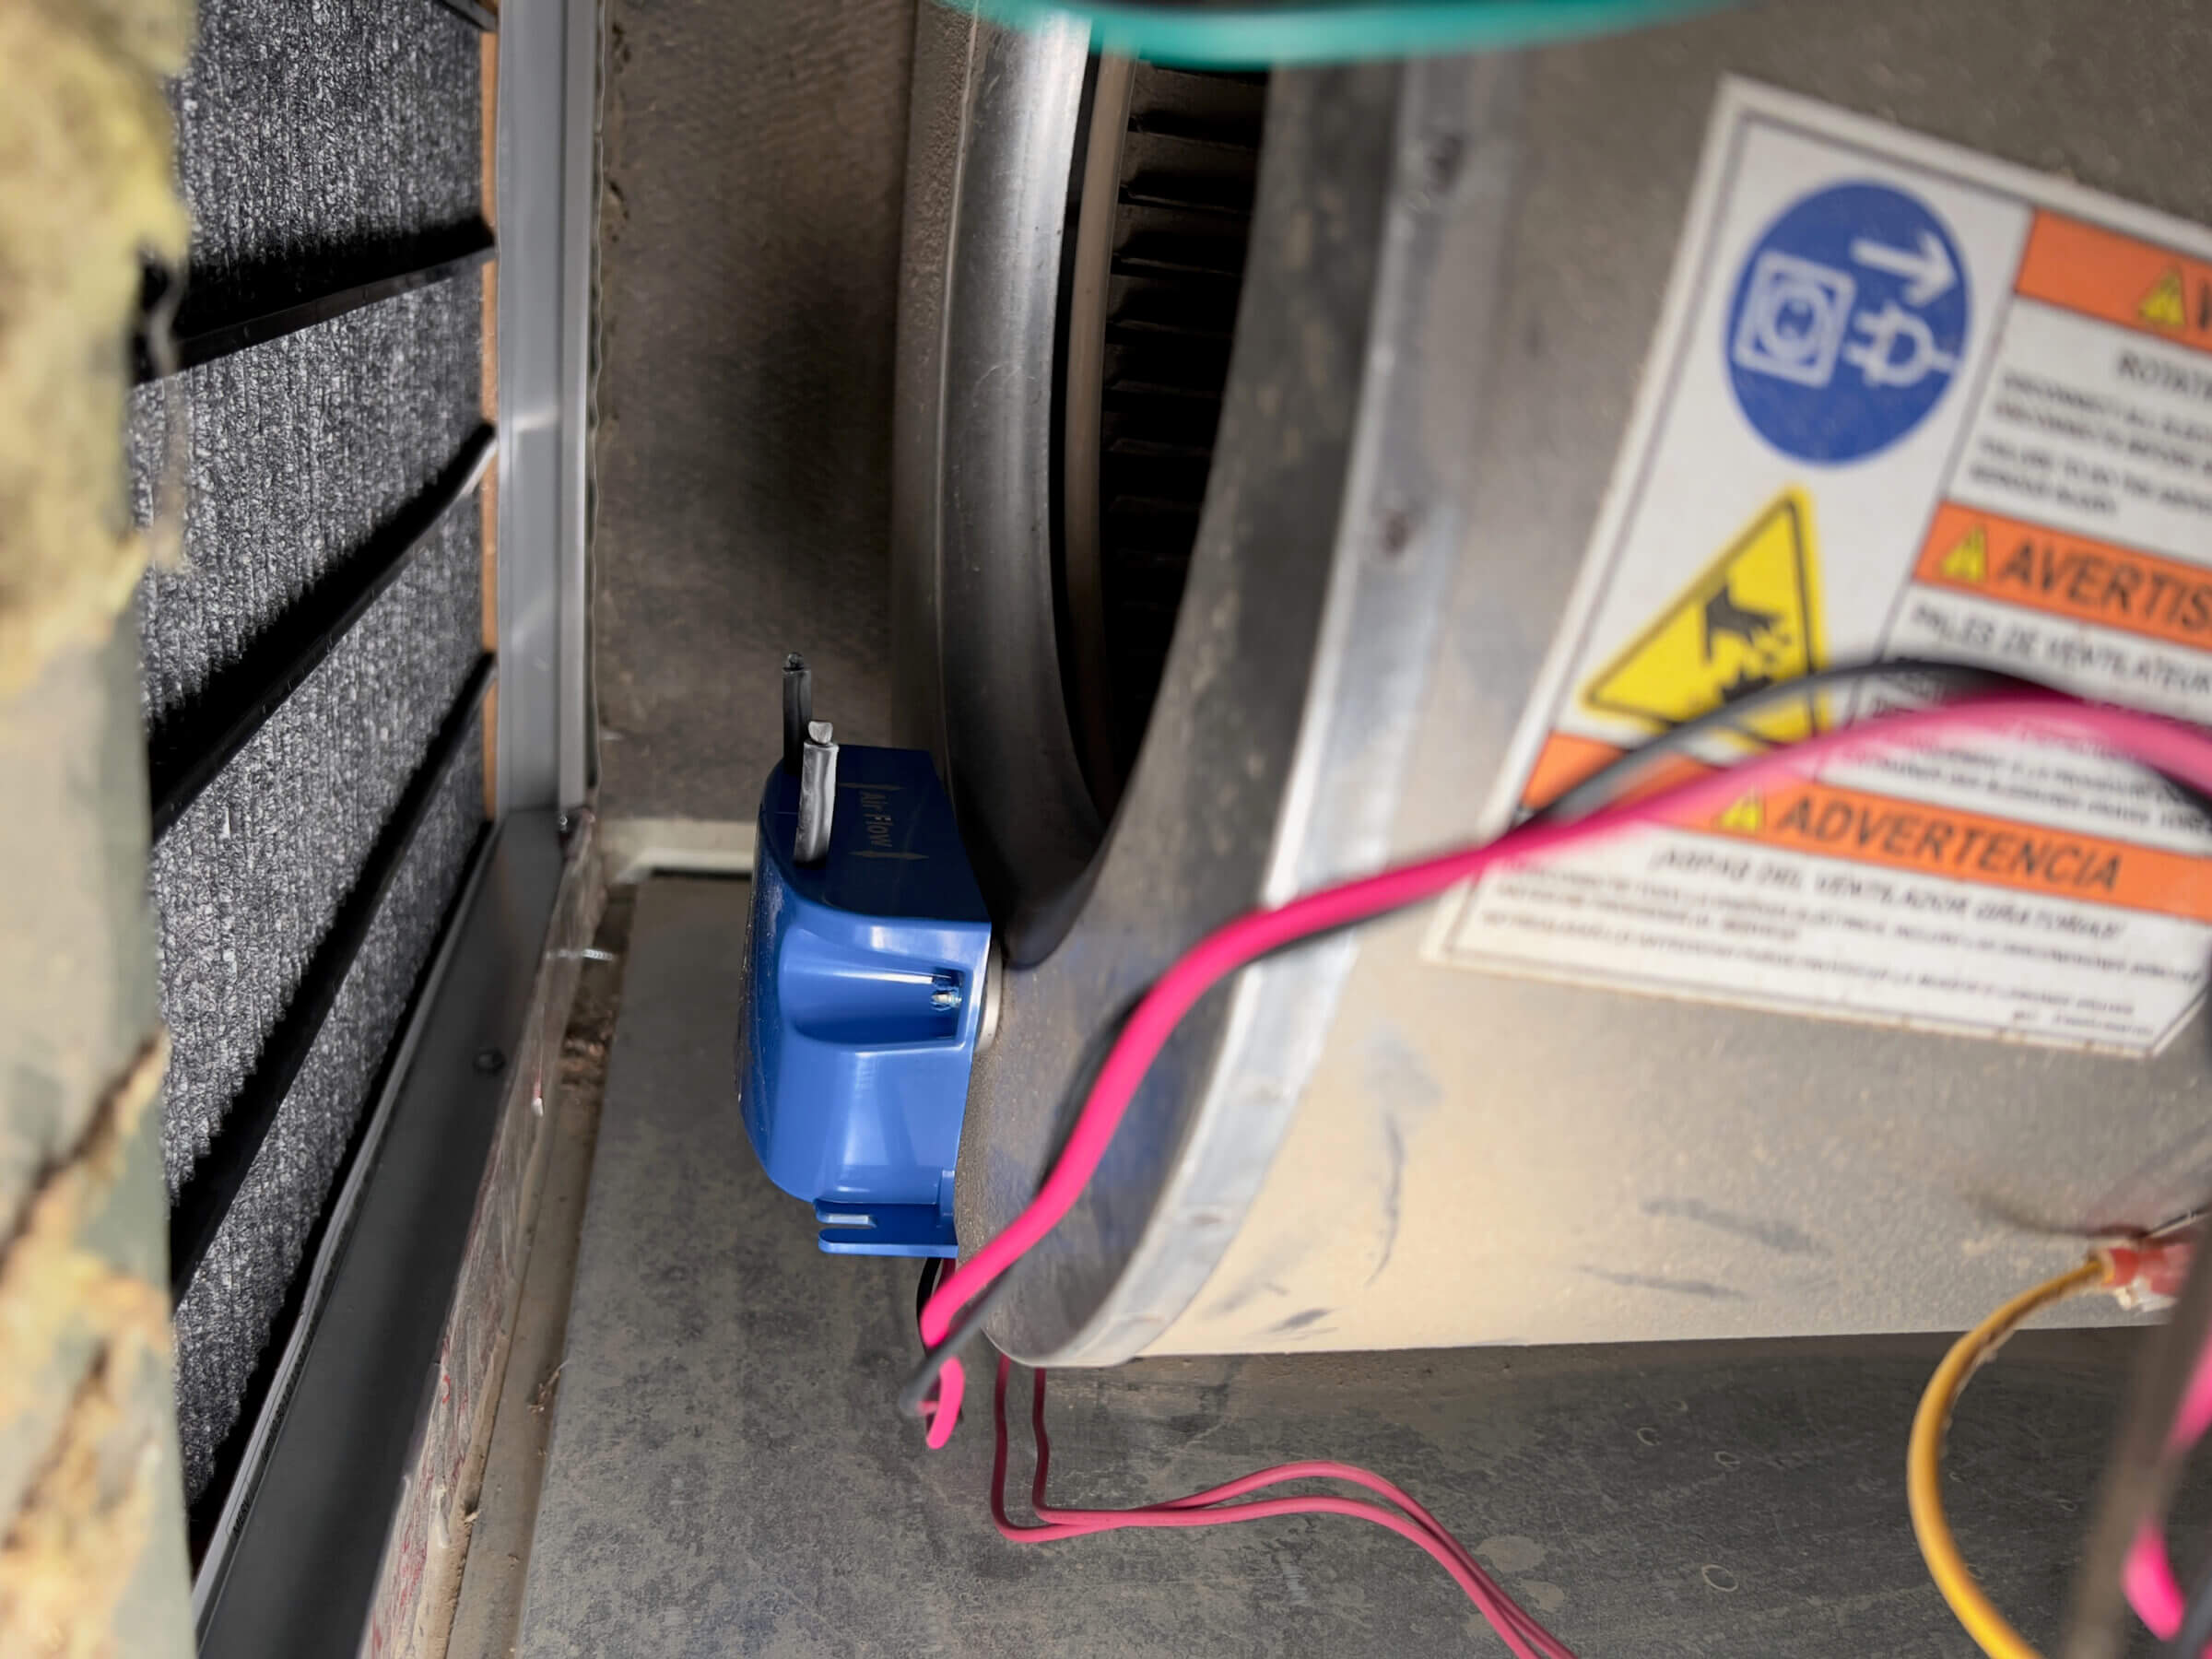 Magnets keep the Bi-Polar securely attached to the housing of the blower fan.